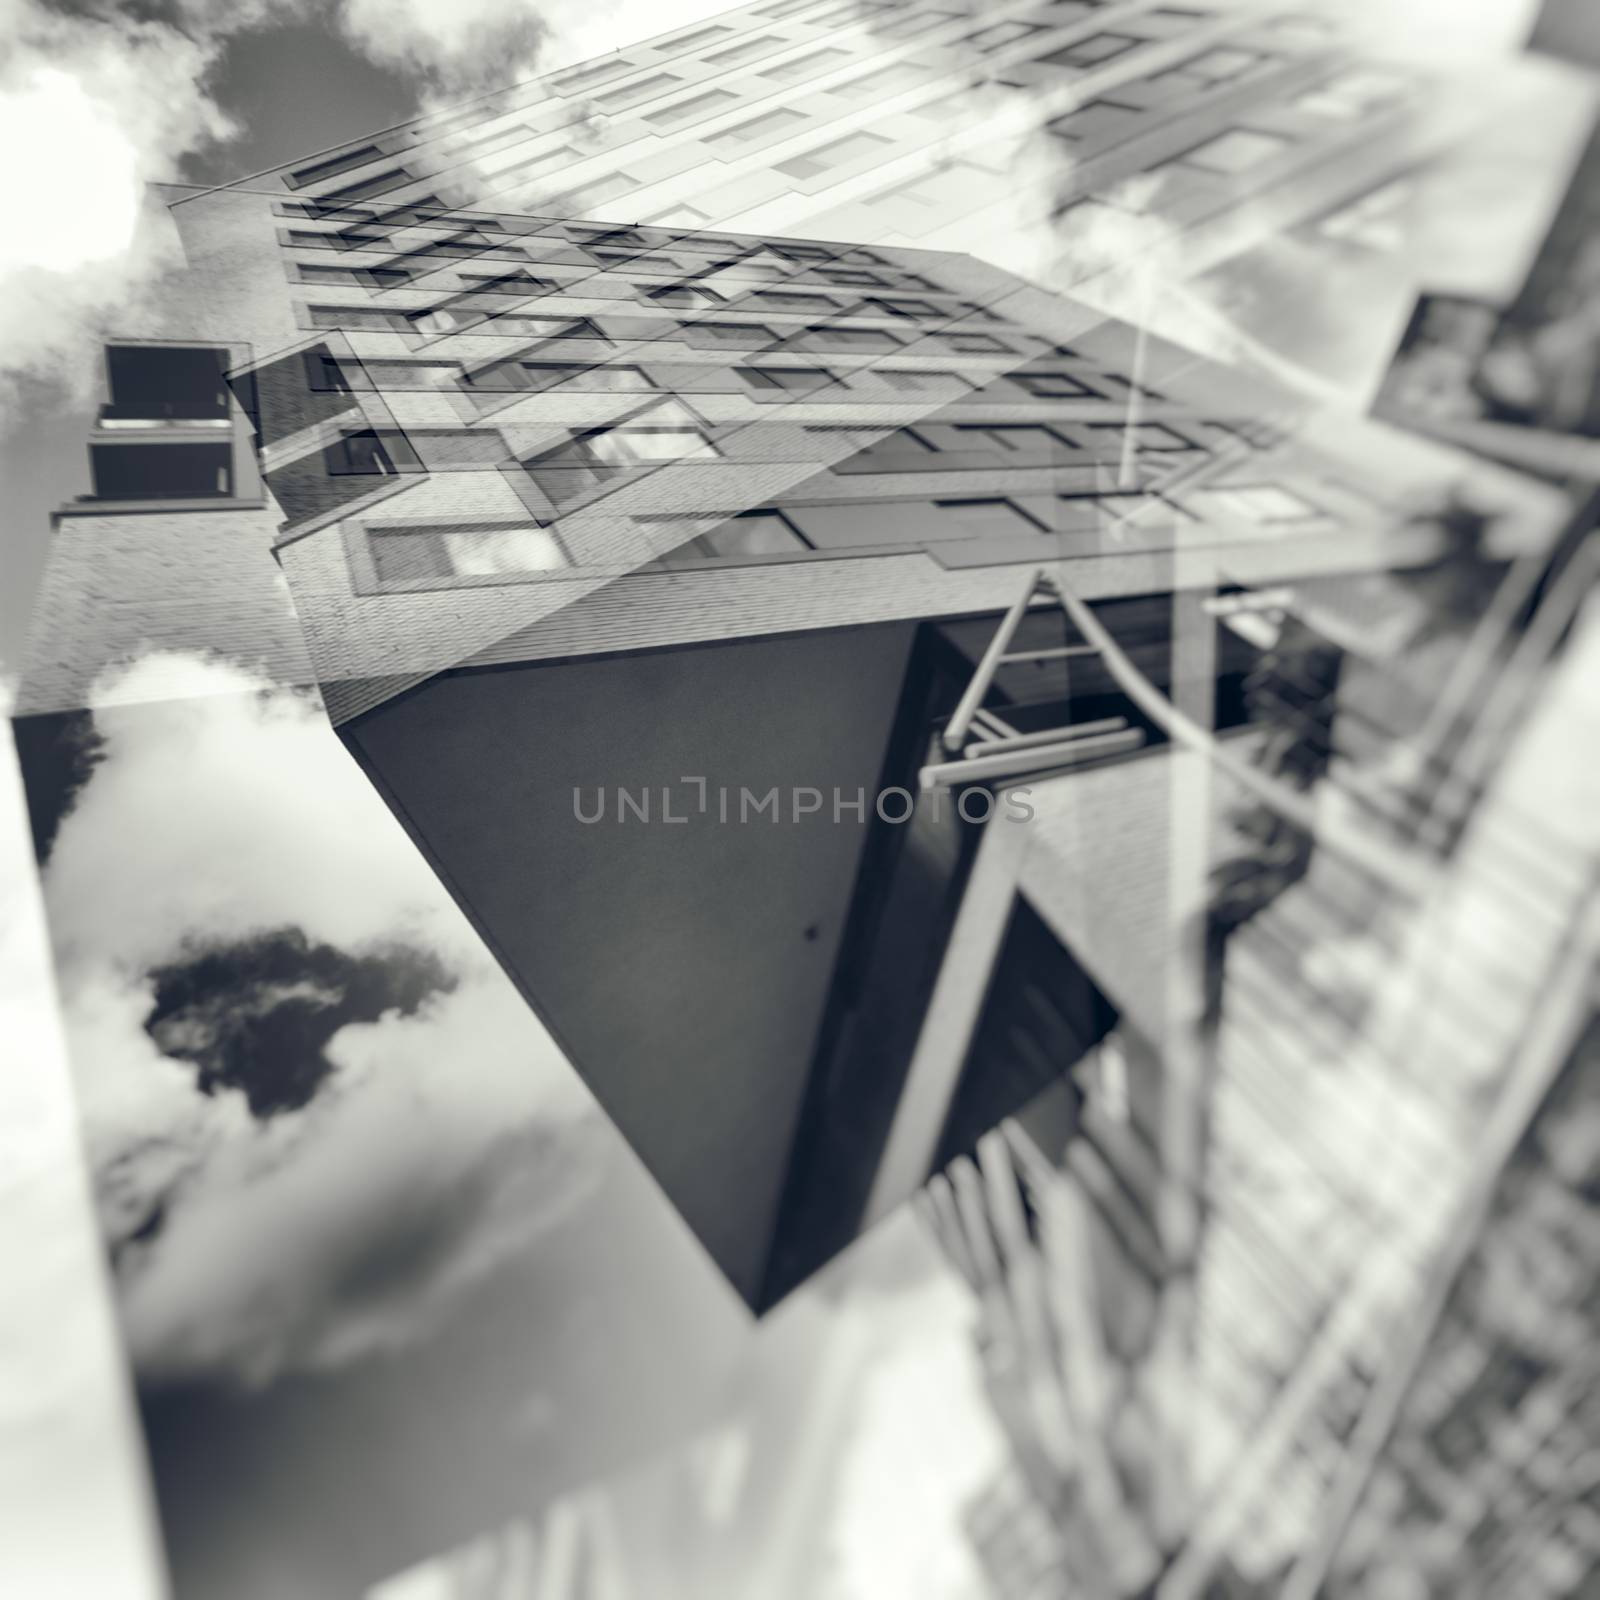 Double exposure photograph of a city building